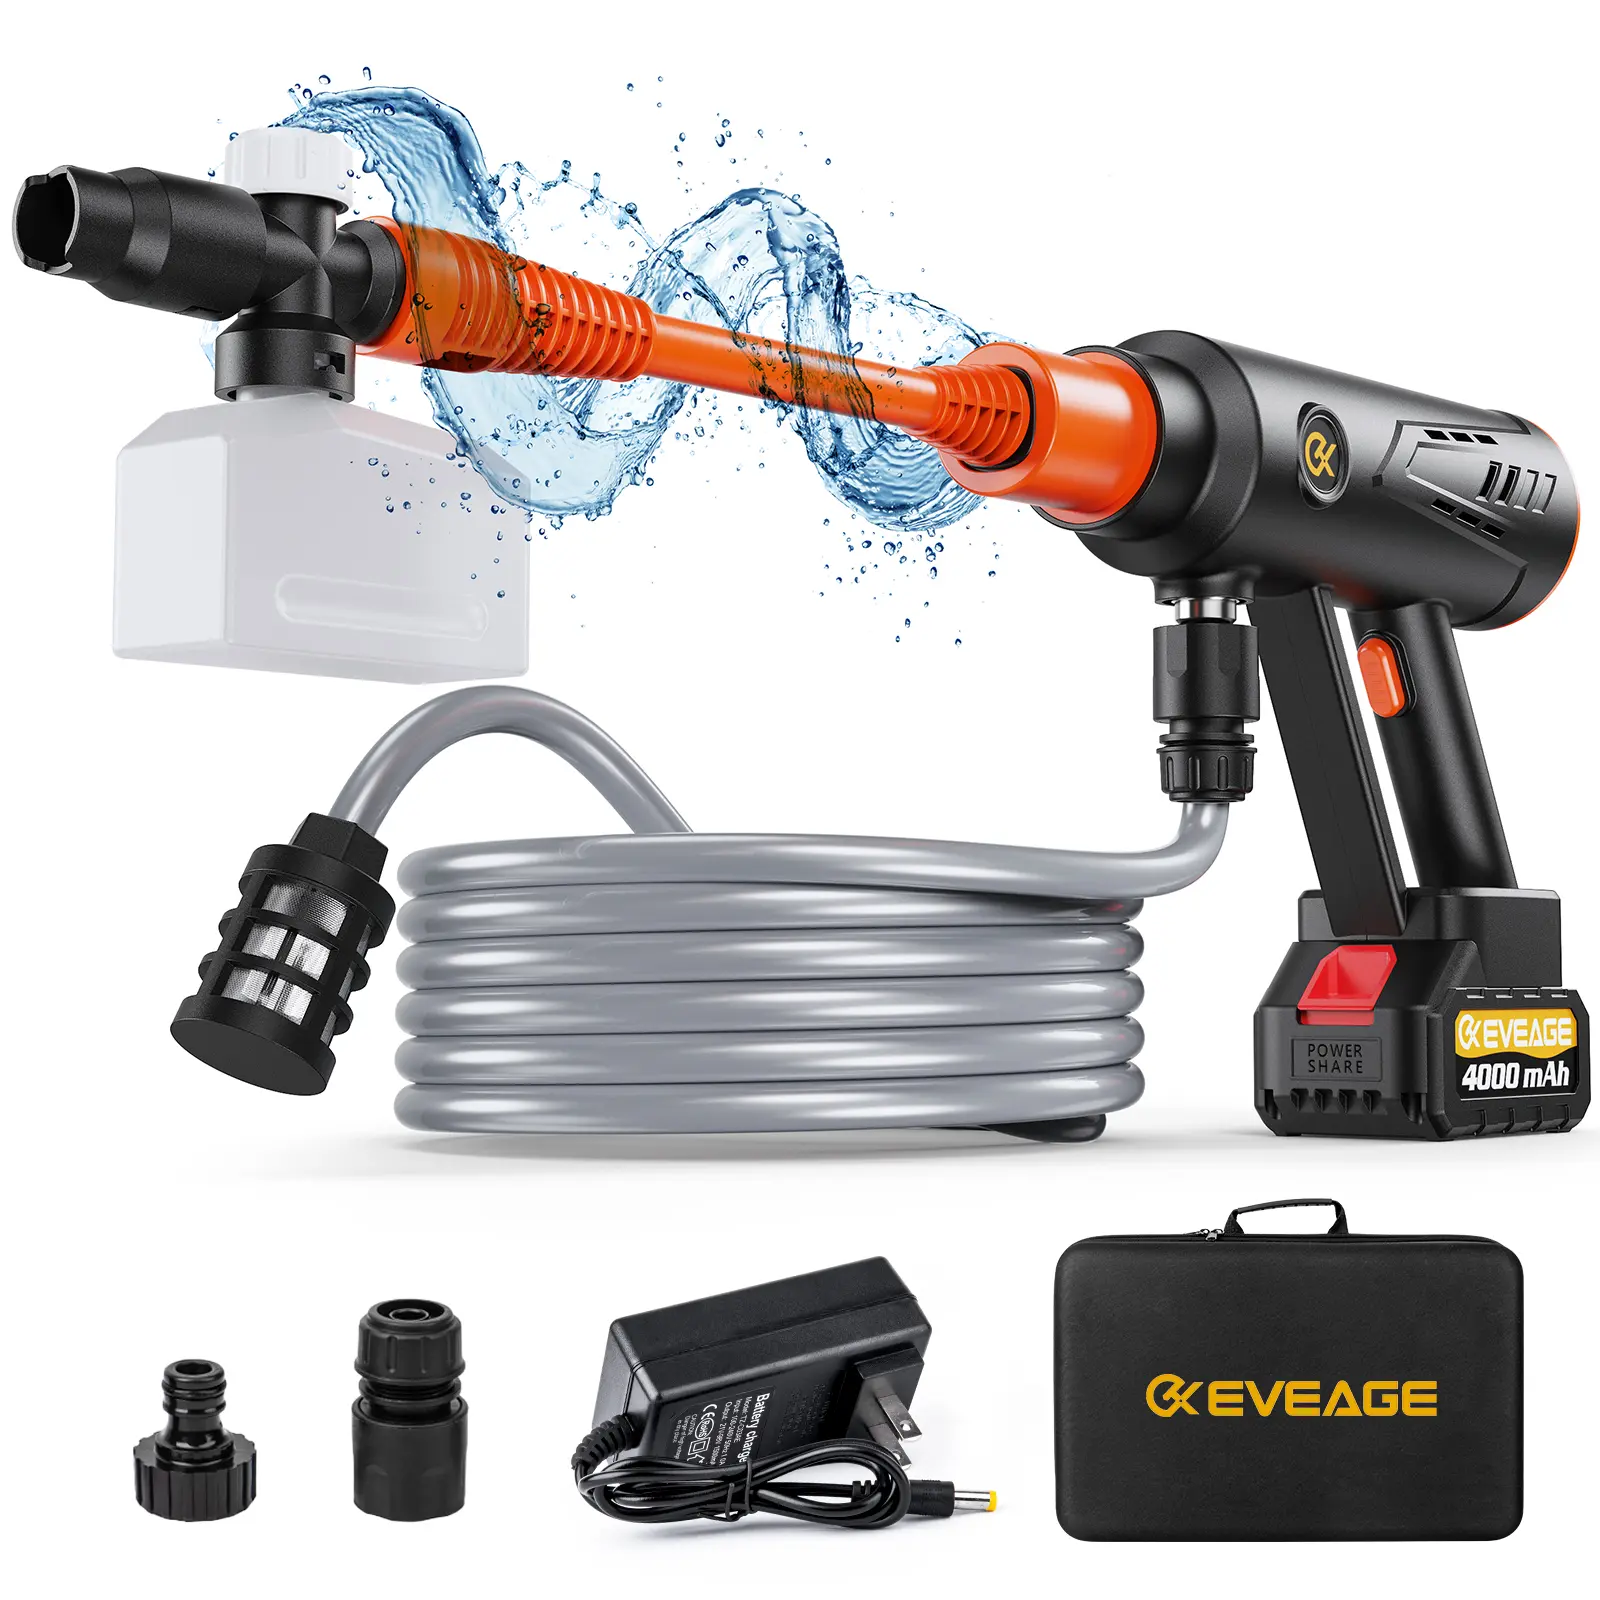 EVEAGE Cordless Power Washer, 1000PSI Cordless Pressure Washer with Rechargeable Battery